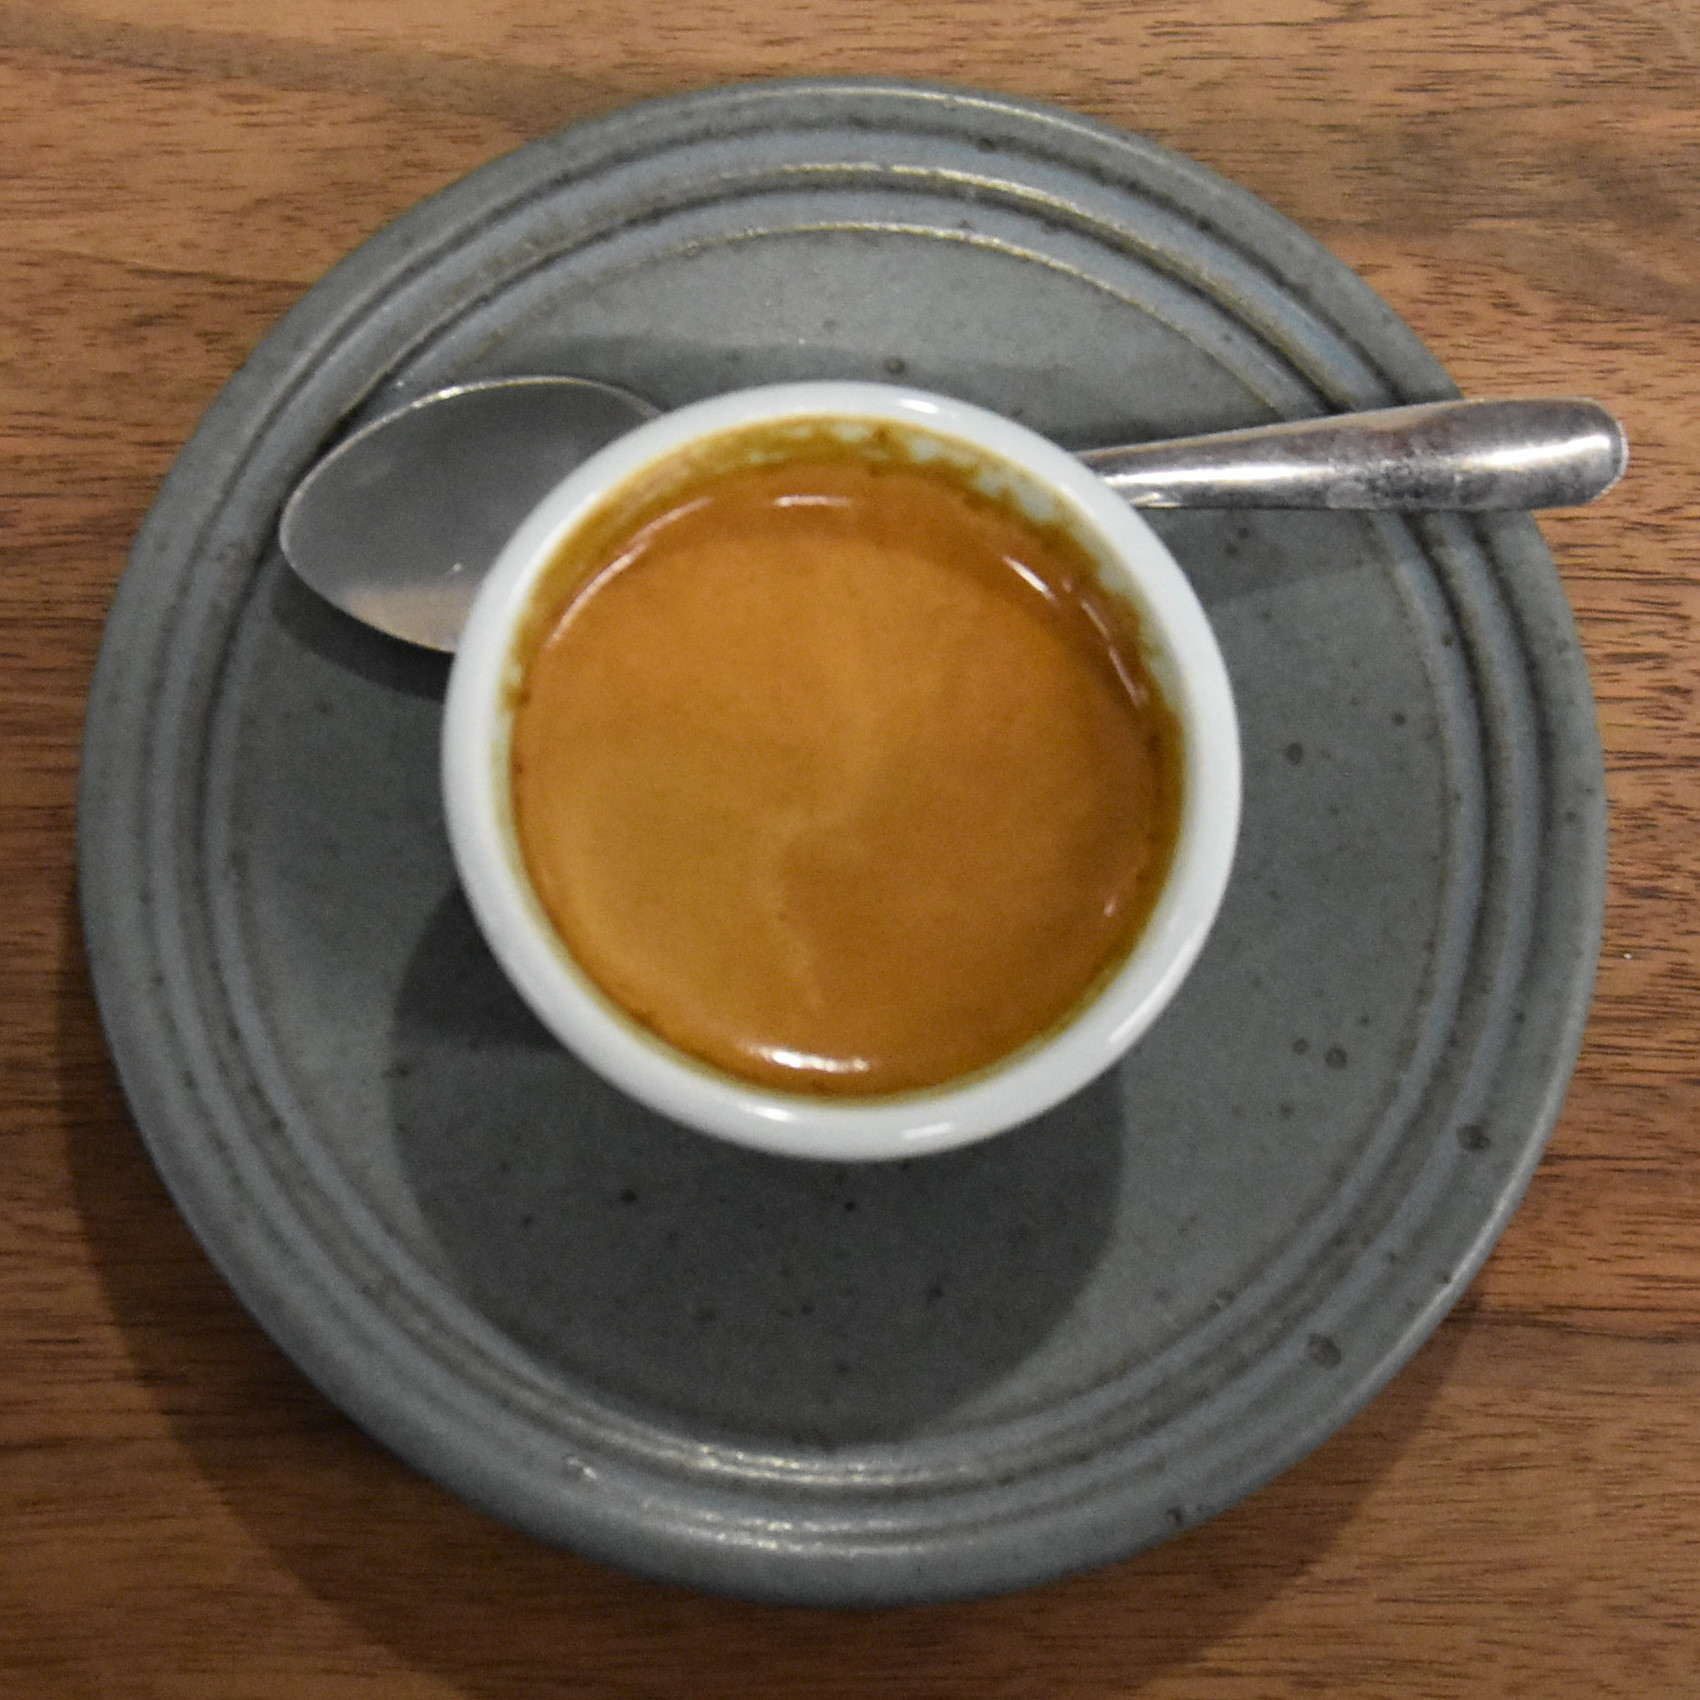 A lovely espresso, made with the Alpha blend, seen from directly above in a handleless ceramic cup and matching saucer, served at Gracenote Coffee and Wine Bar in High Street Place, Boston.